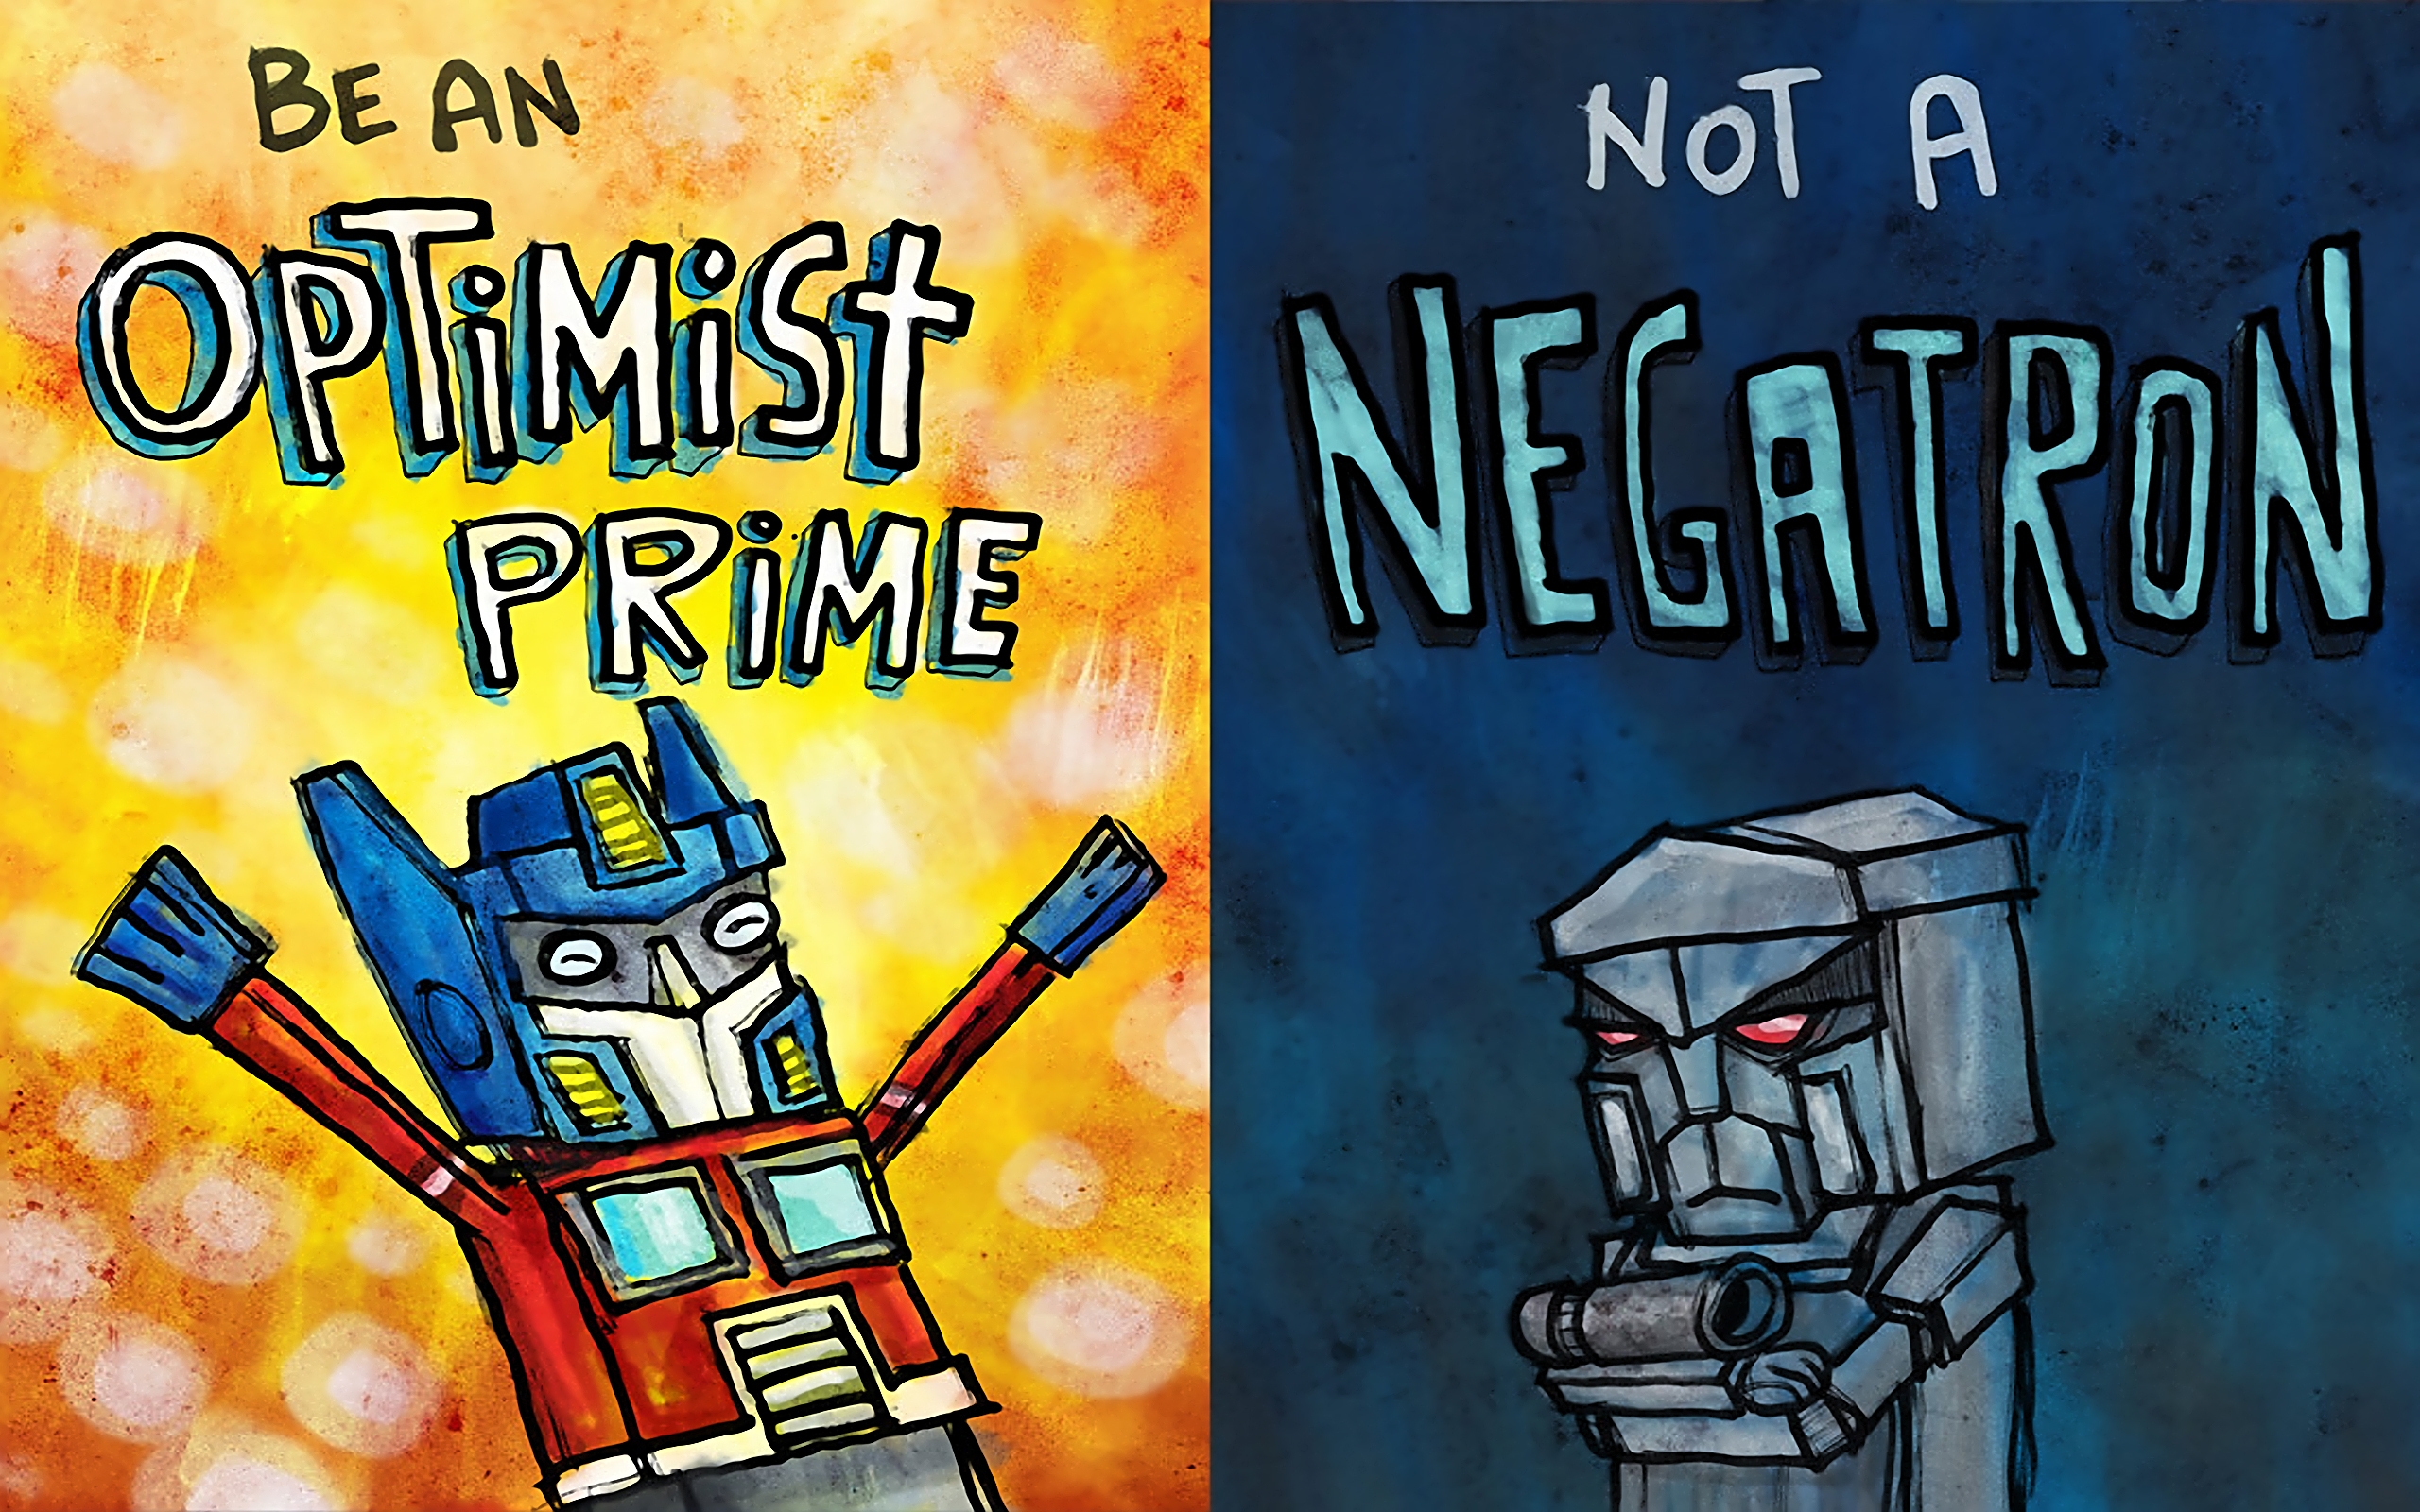 Optimist and Pessimistic for 2560 x 1600 widescreen resolution